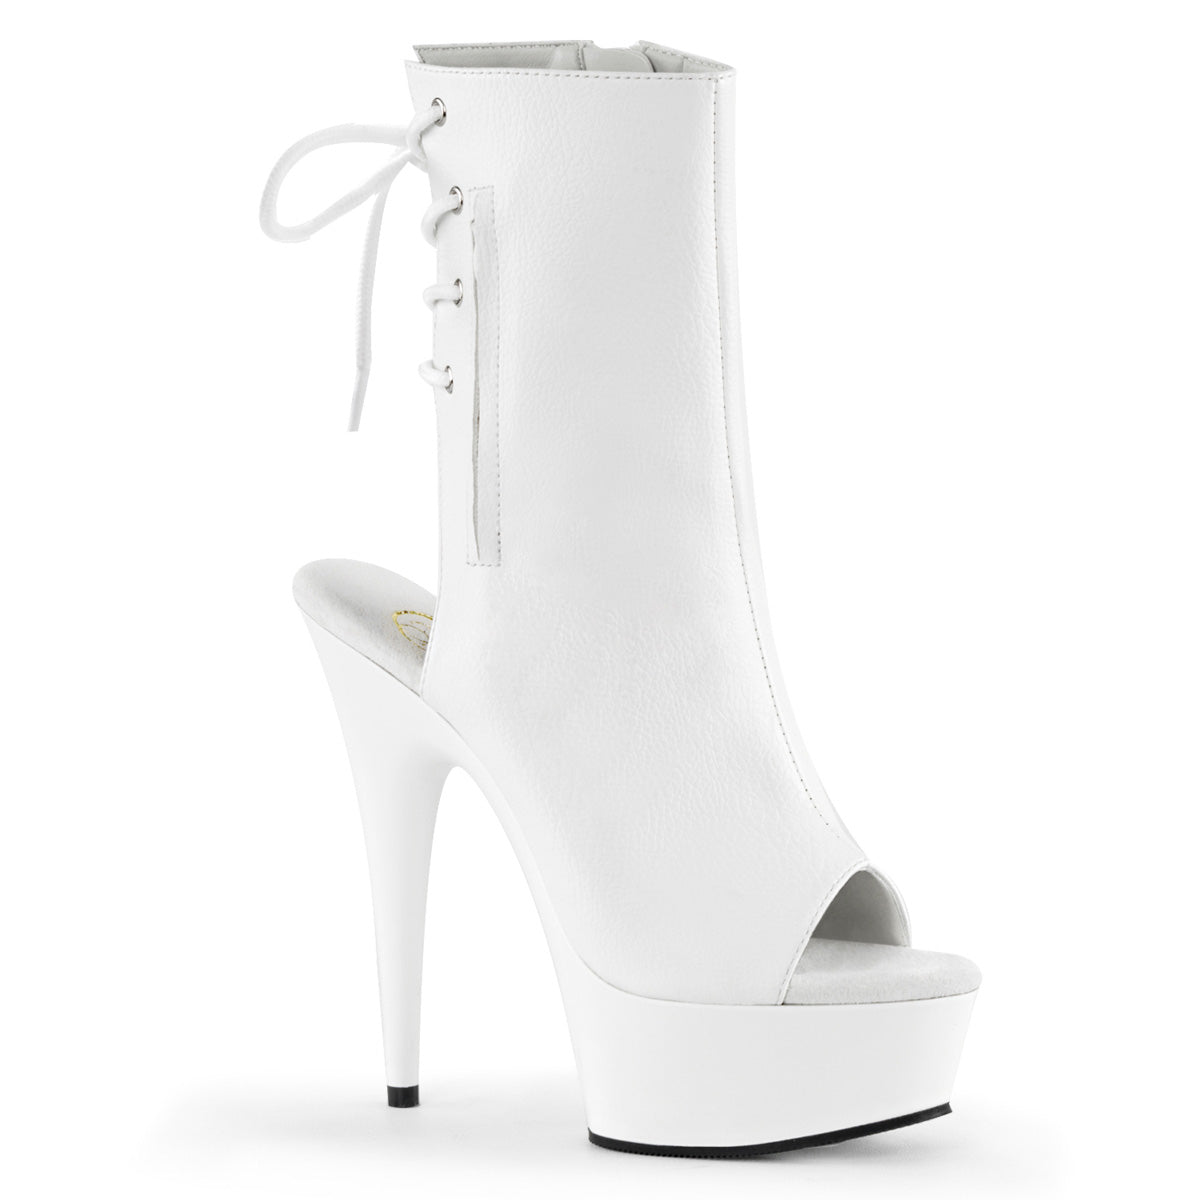 Pleaser Womens Ankle Boots DELIGHT-1018 Wht Faux Leather/Wht